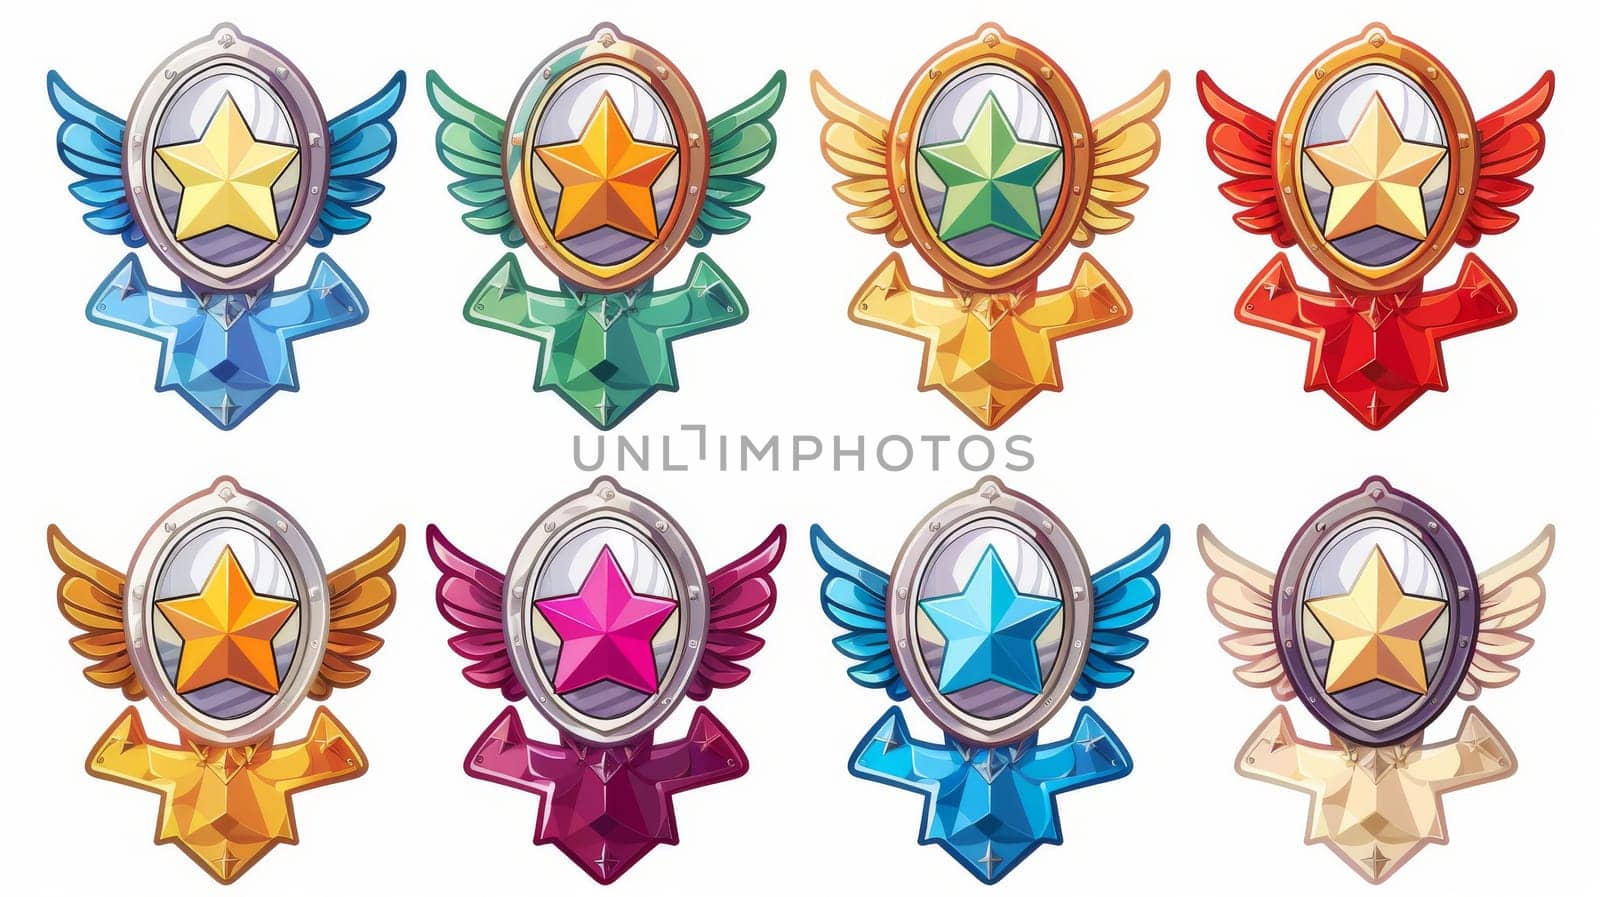 Set of military game ranking badges with star insignia. Clipart illustration of award medals with stone, iron, silver, gold textures and cracks. Level achievement icons with wings. by Andrei_01